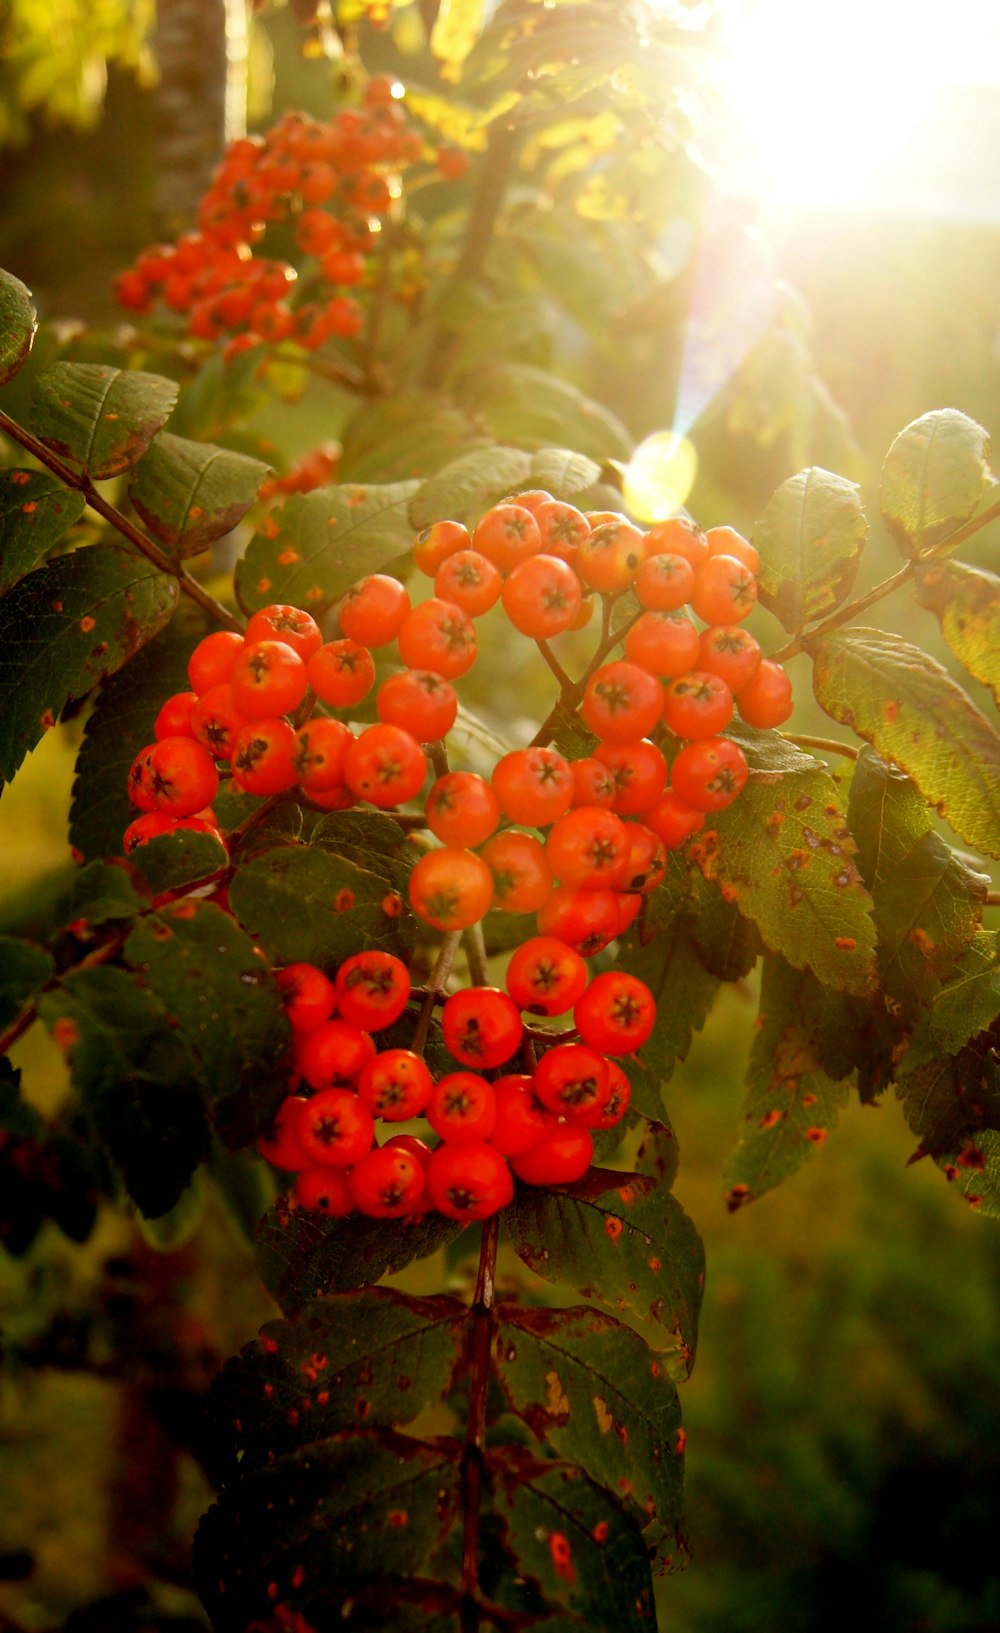 a bush with bright red berries on it